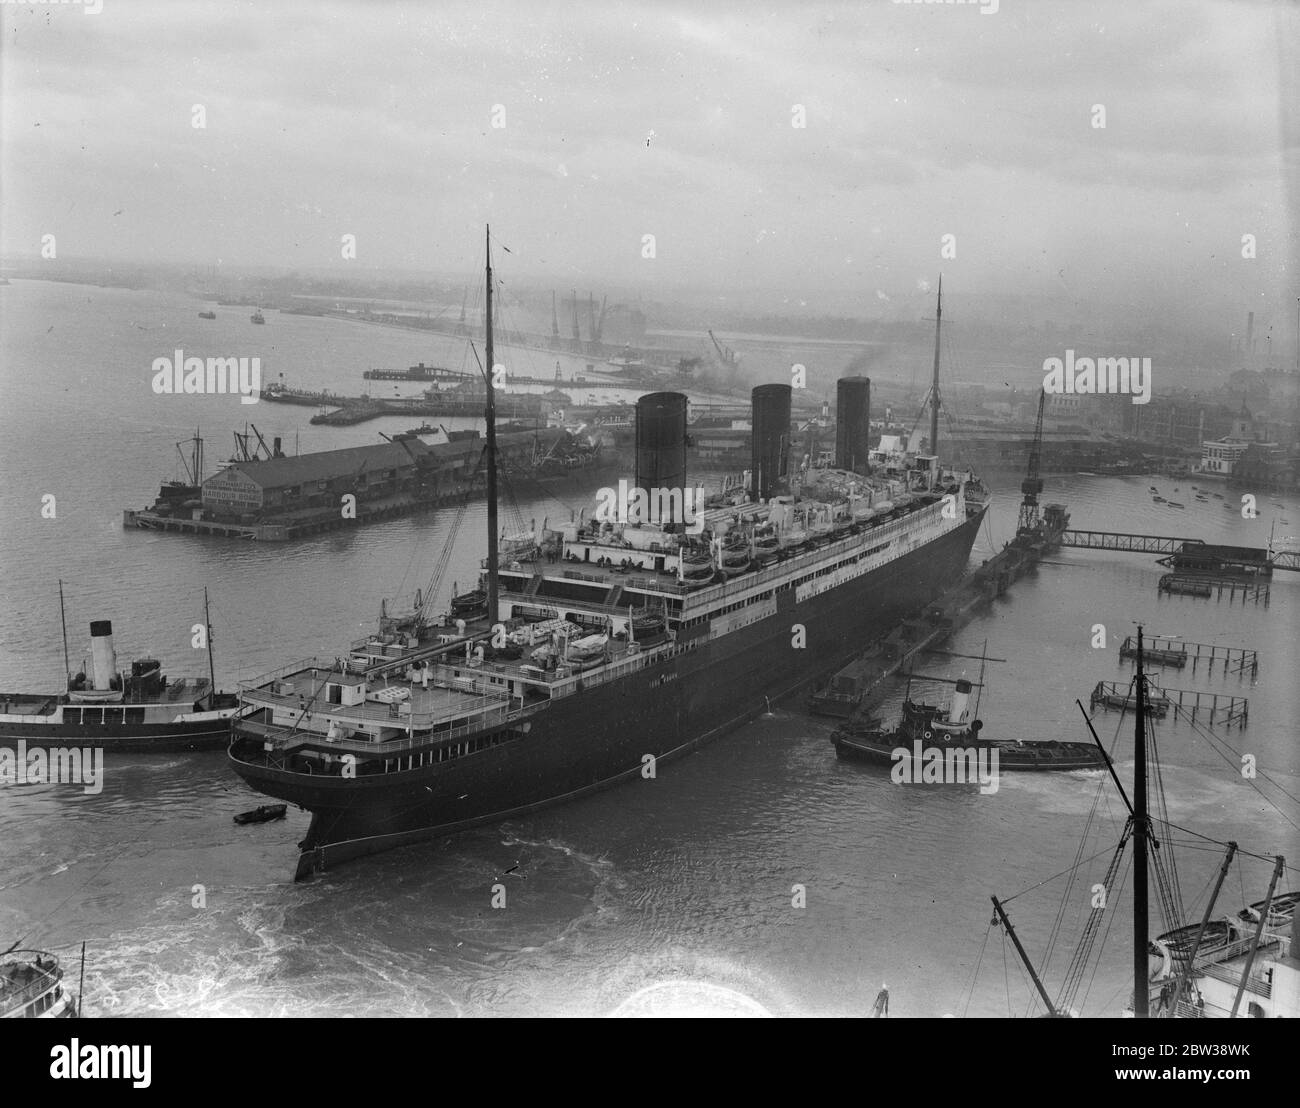 Berengaria  goes into floating dry dock for overhaul at Southampton . The cunard liner  Berengaria  was taken into the floating dry dock at Southampton for overhaul . Photo shows ; the  Berengaria  entering the floating dock at Southampton . 5 January 1934 30s, 30's, 1930s, 1930's, thirties, nineteen thirties Stock Photo